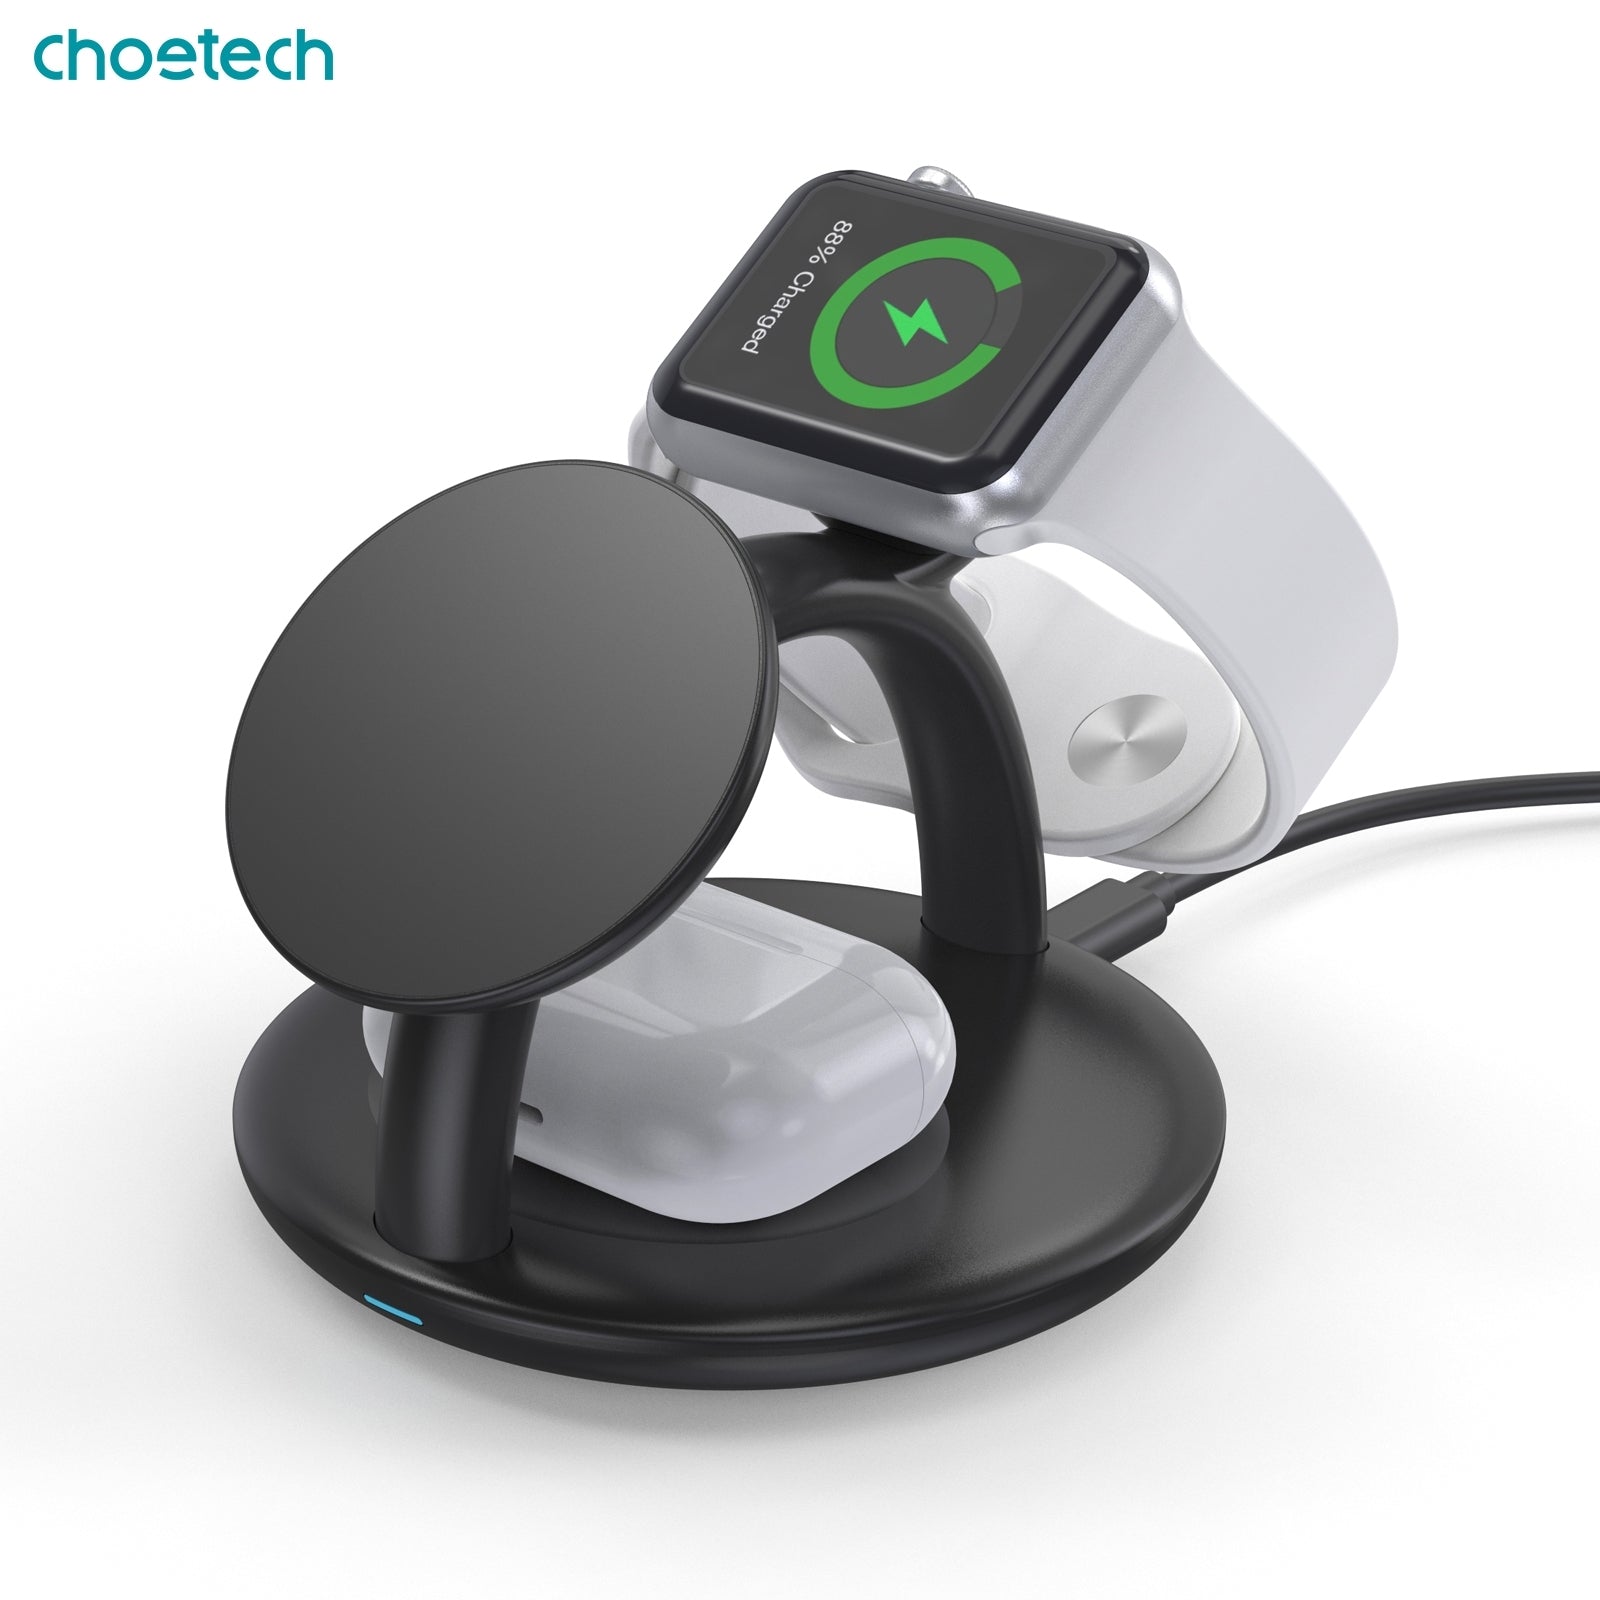 CHOETECH T587-F 3-in-1 Magnetic Wireless Charger Station for iPhone 12/13/14/AirPods Pro/iWatch